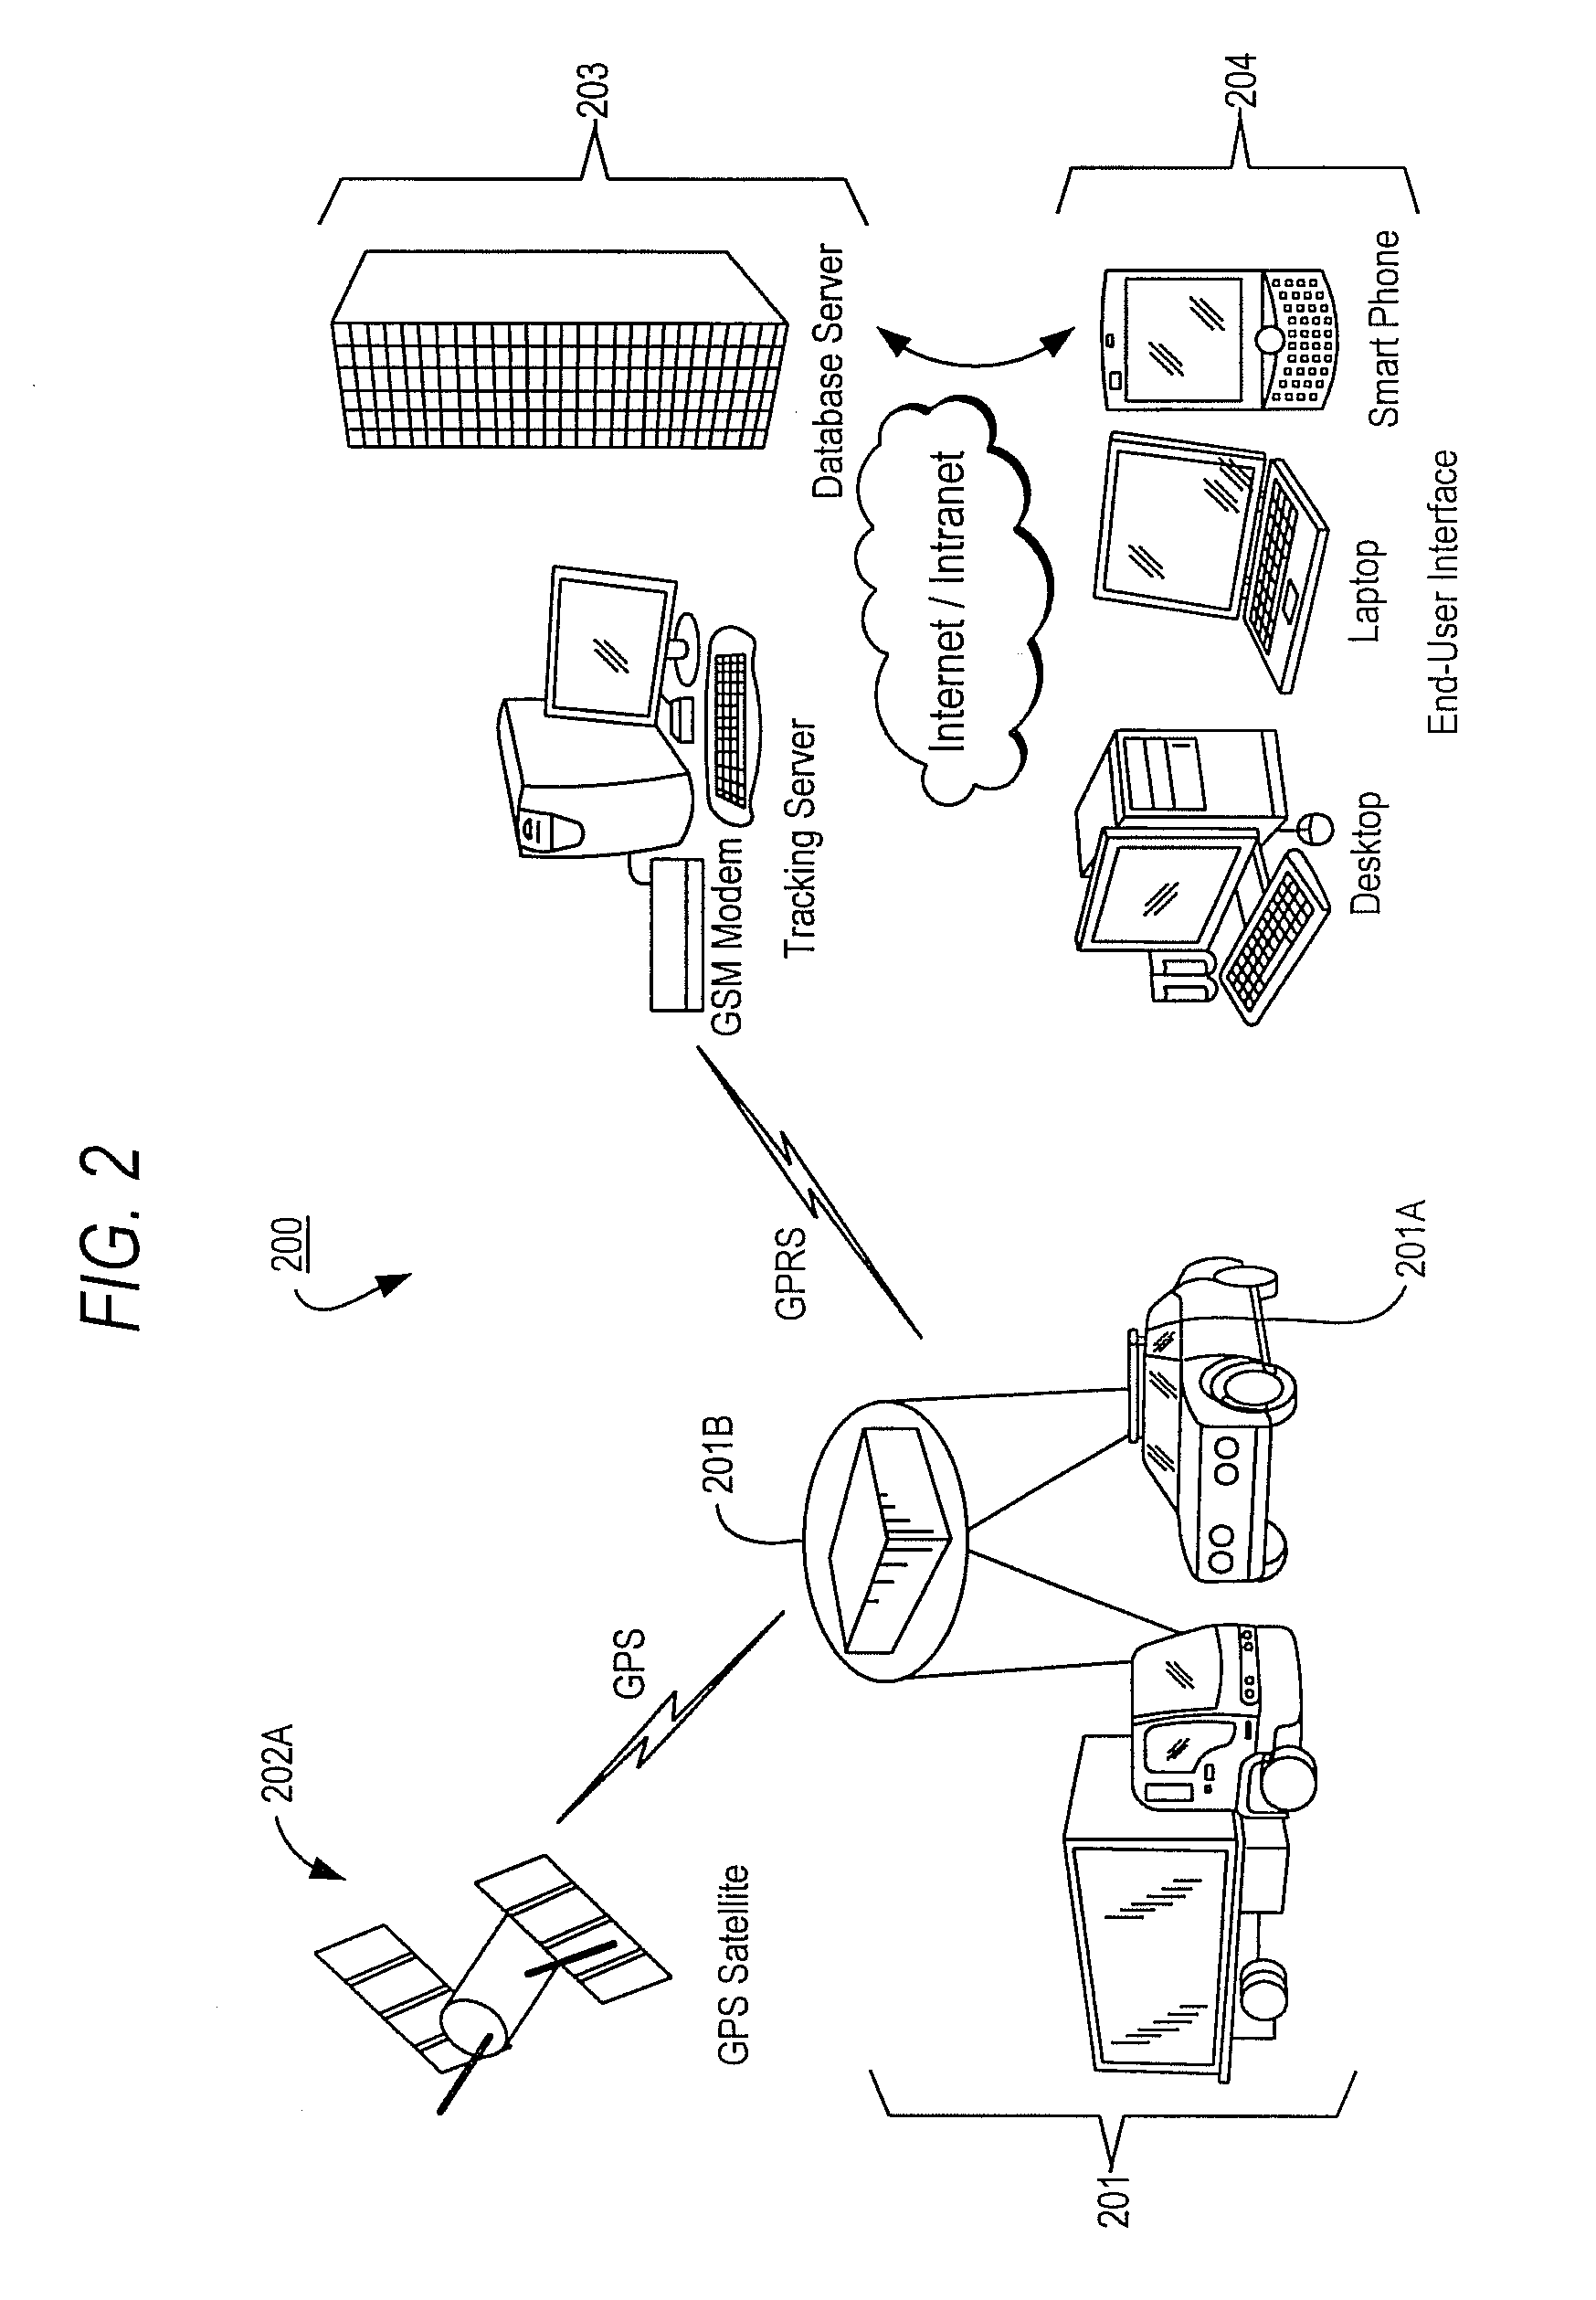 System, method, and apparatus for improved transportation management